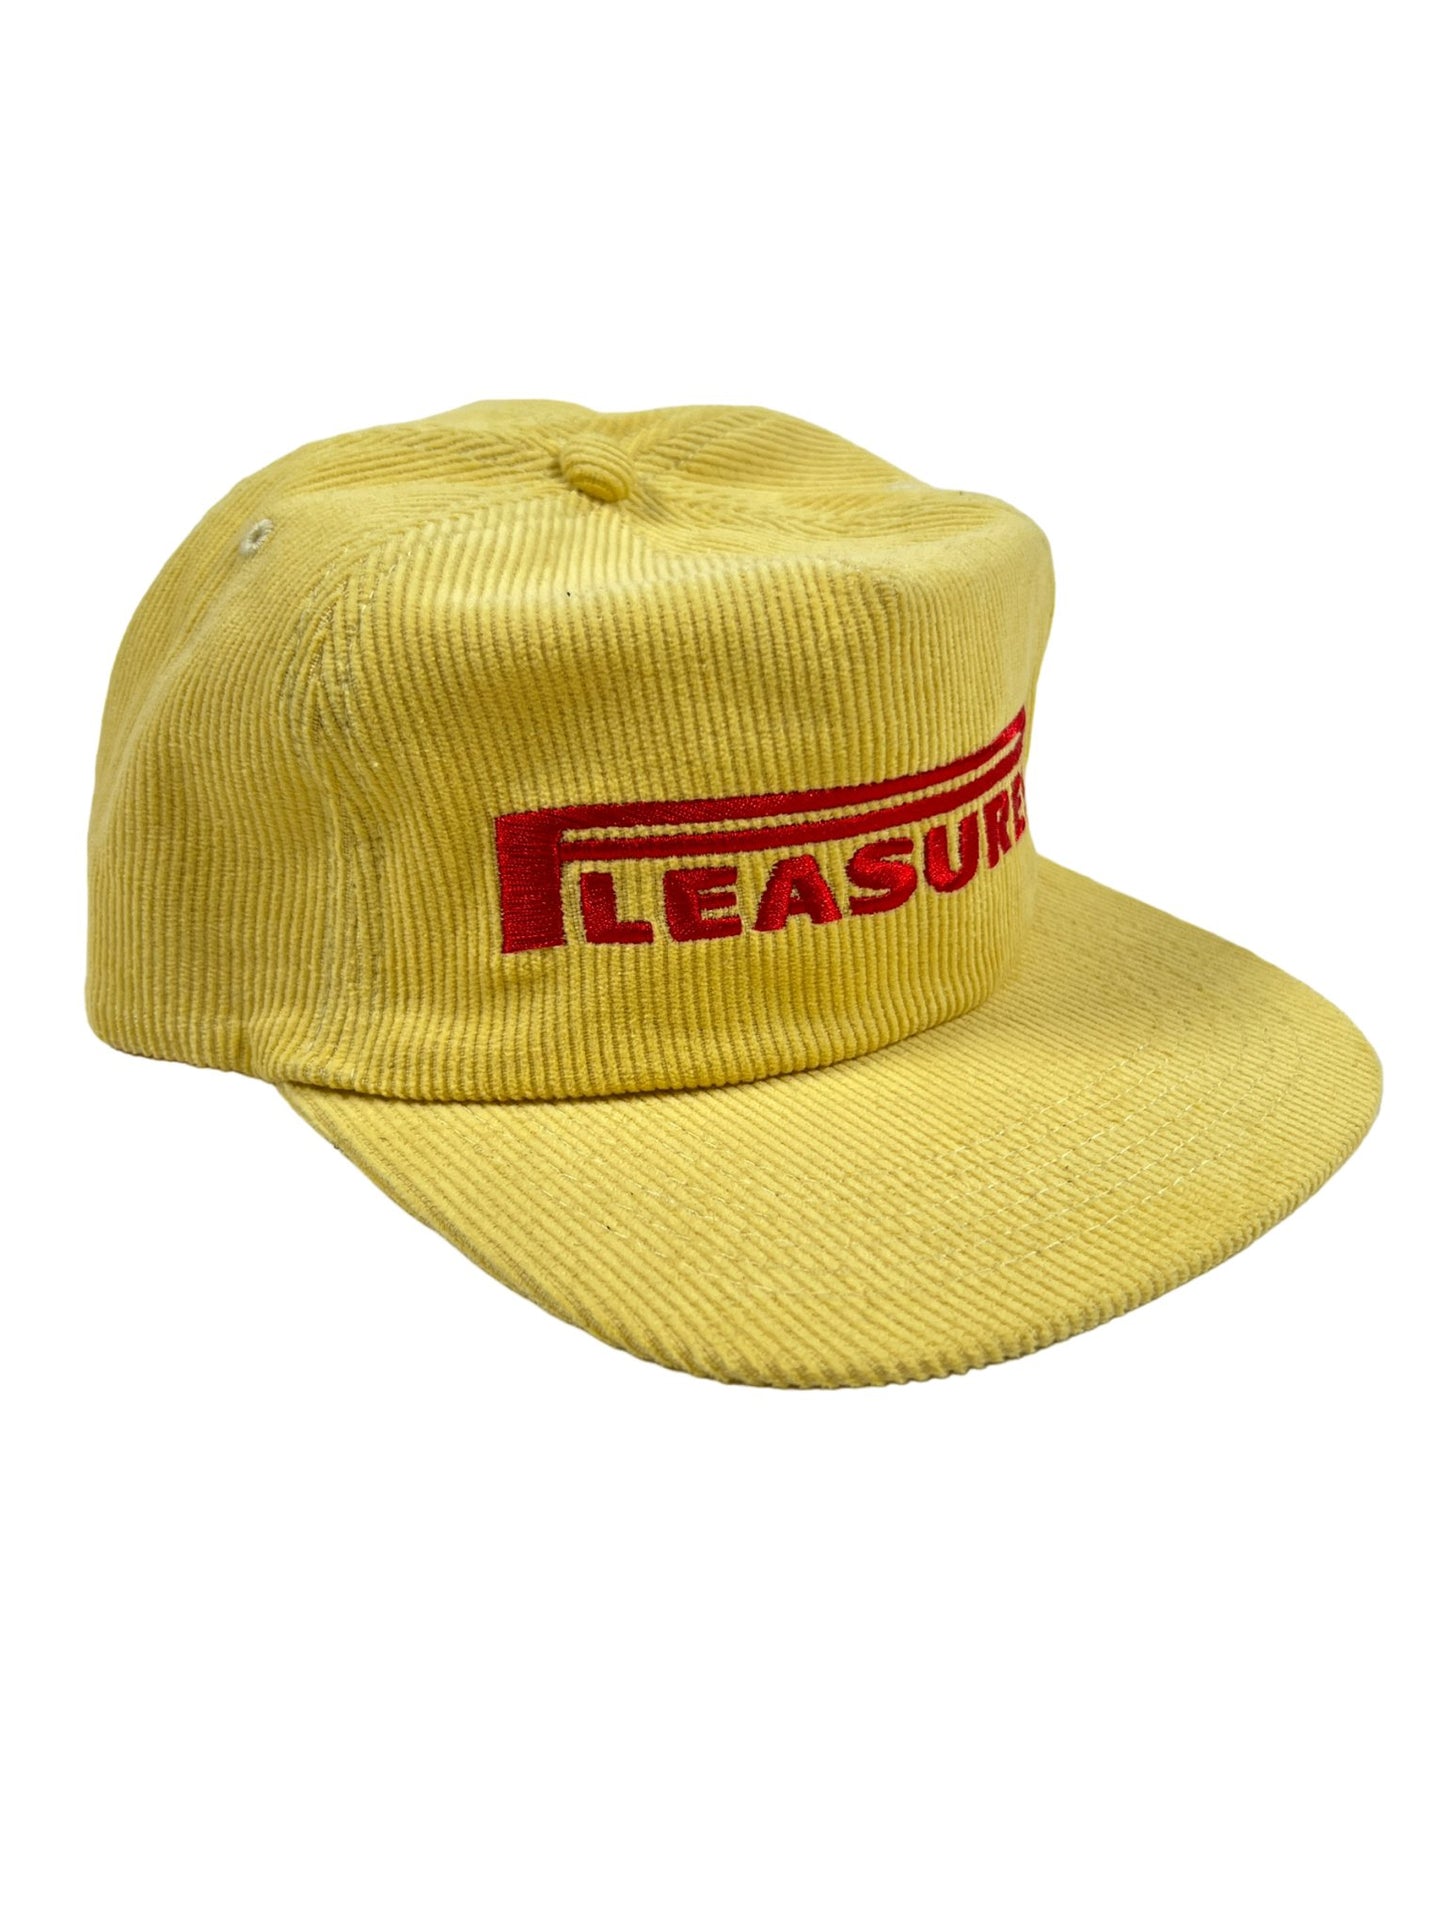 A yellow PLEASURES snapback hat with the word "leisure" embroidered on it.